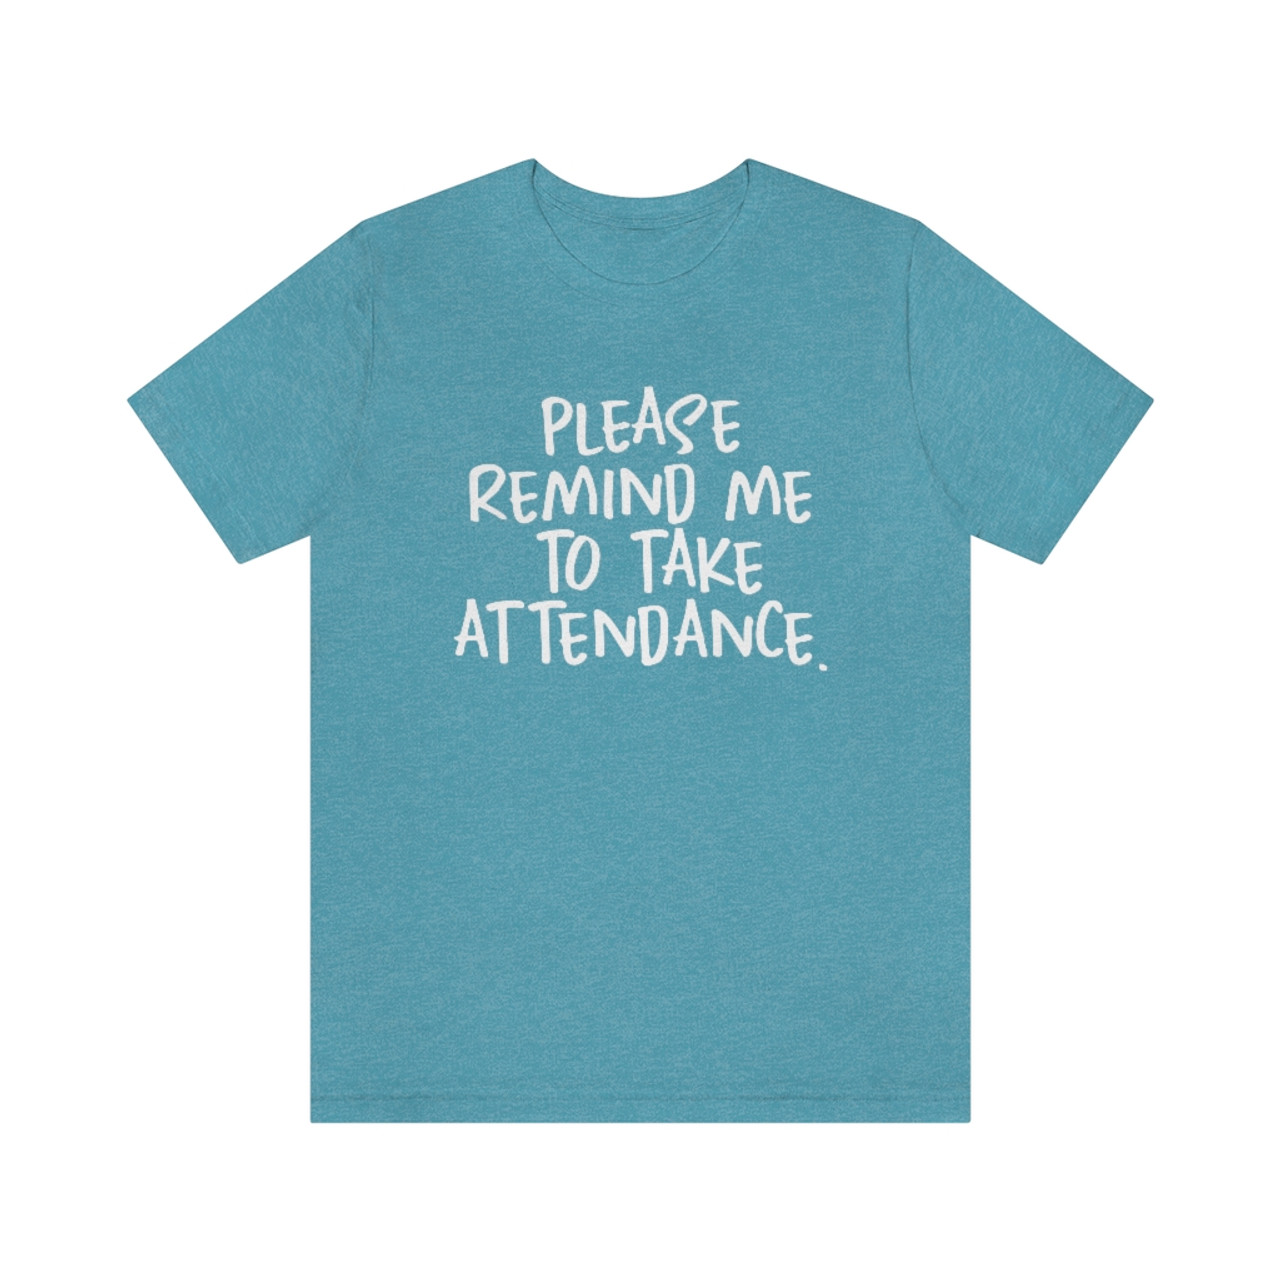 "Please remind me to take attendance." - KcMackFunny